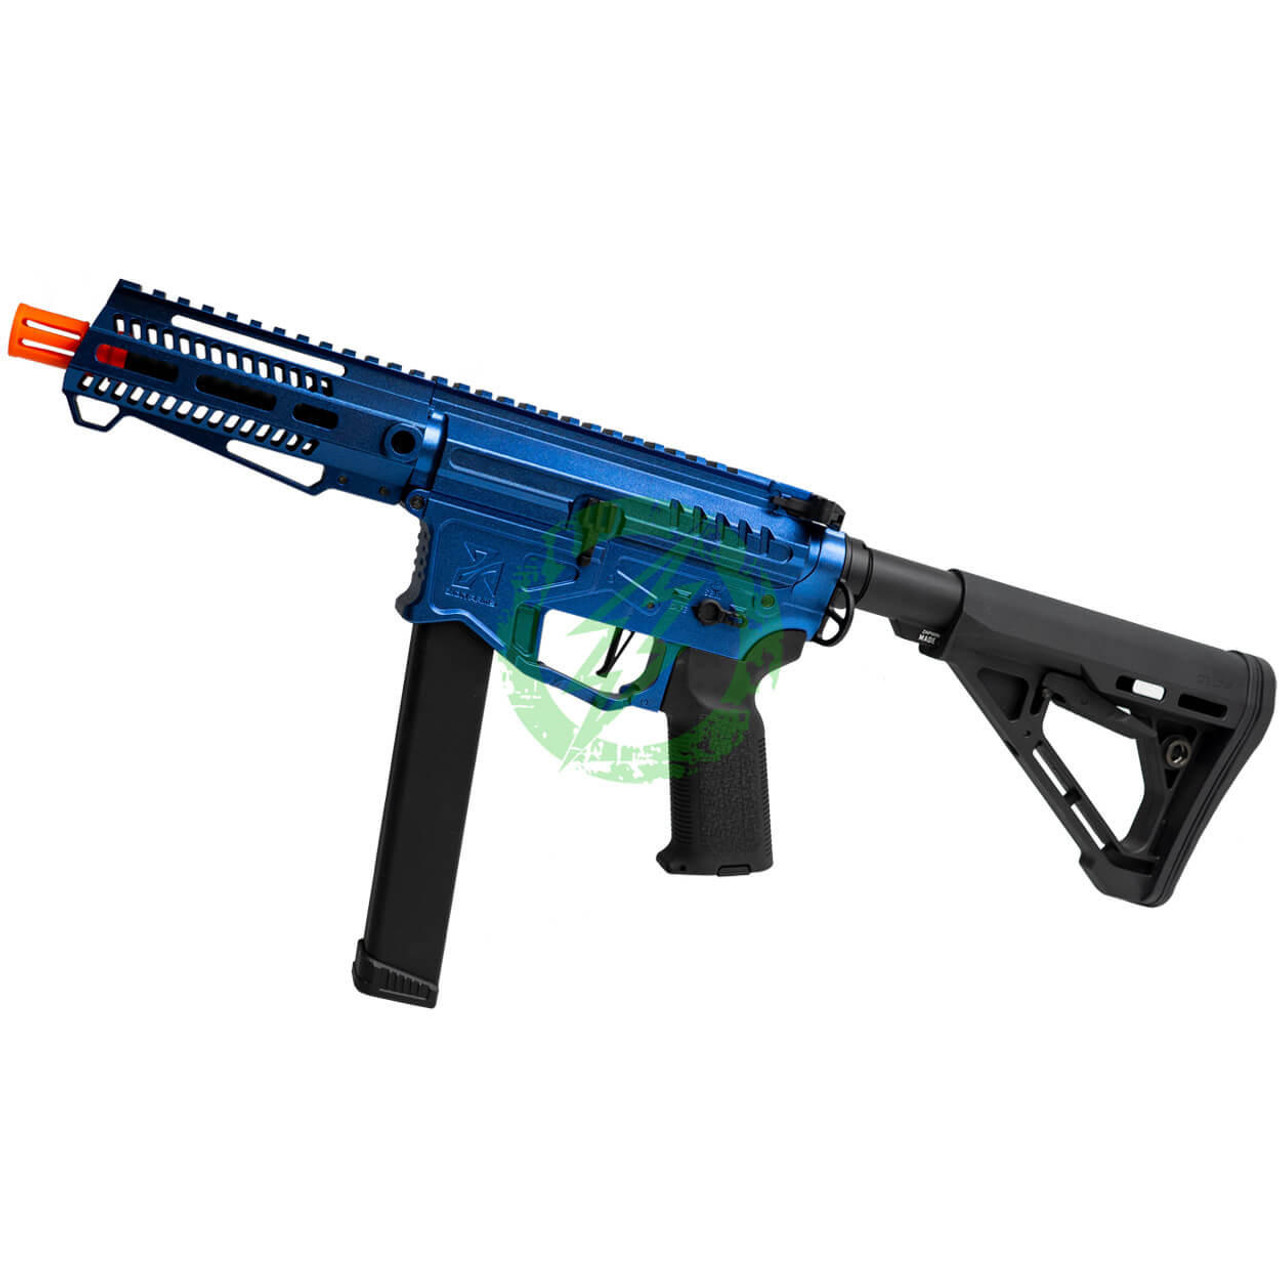  Zion Arms R&D Precision Licensed PW9 Mod 1 Airsoft Rifle with Delta Stock 